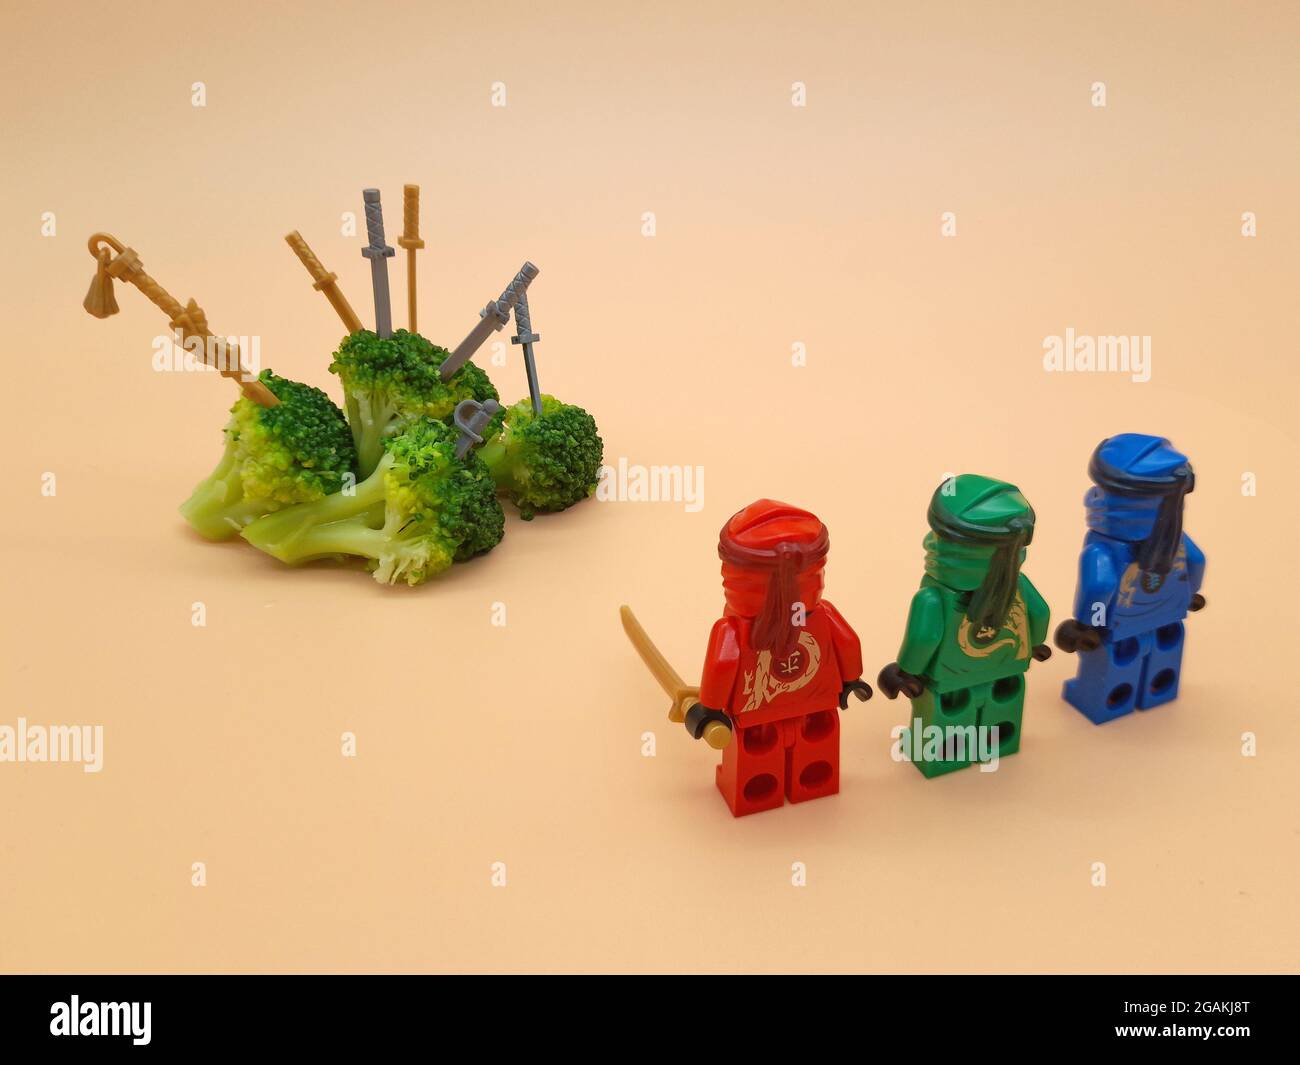 Stockholm, Sweden - January 12, 2021: Three LEGO ninjas have attacked some broccoli and put lots of swords in it. A protest by a child that don't want Stock Photo